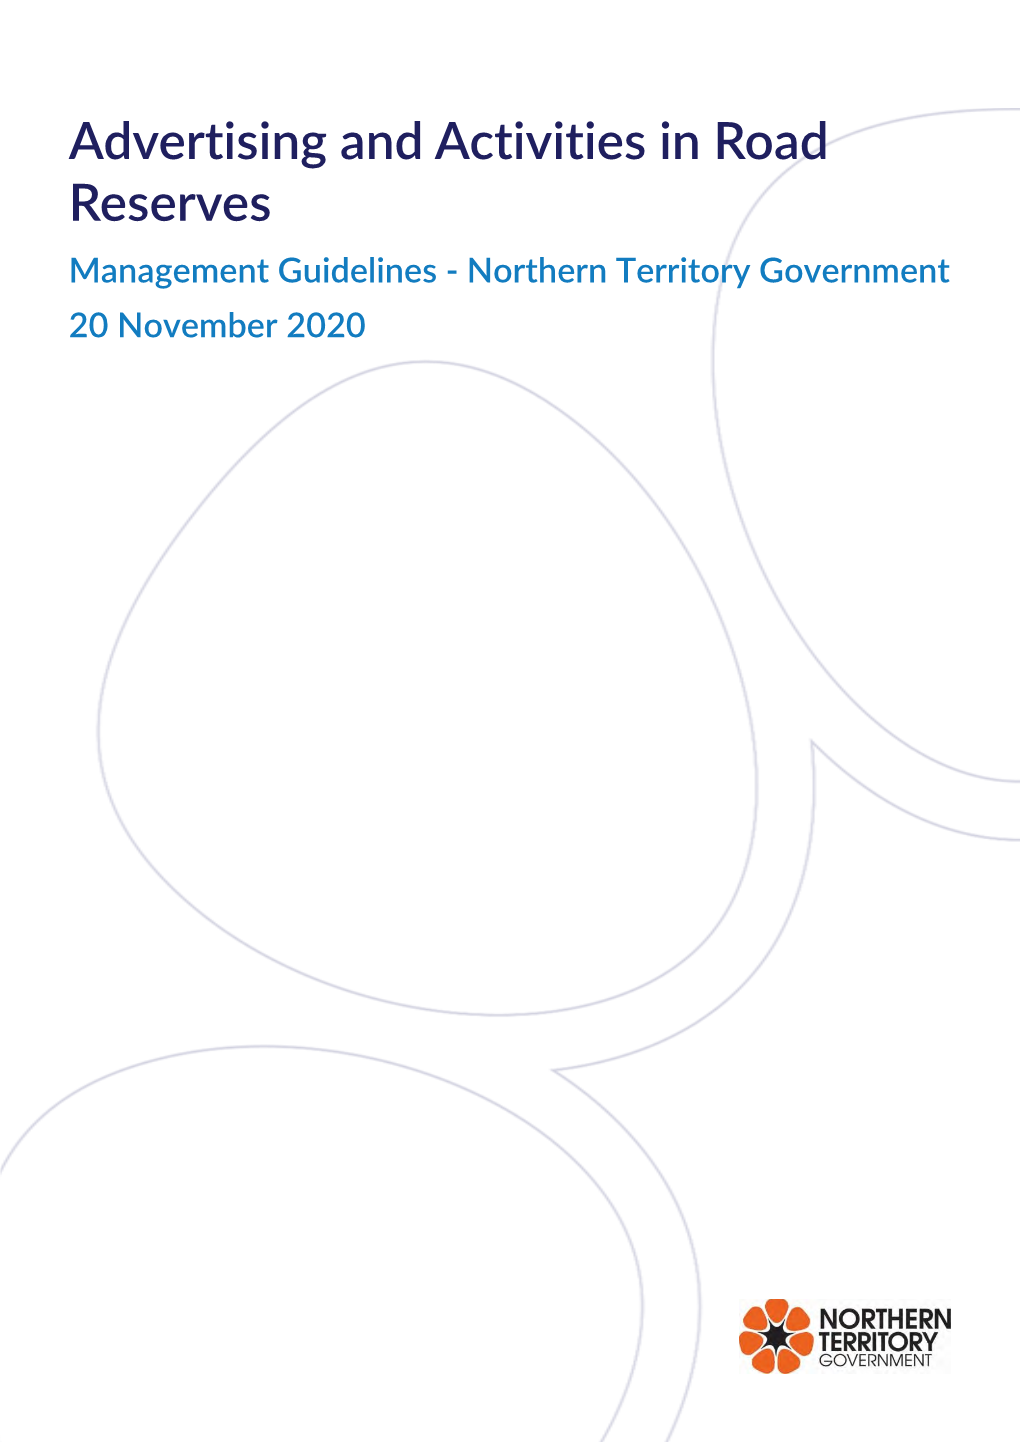 Advertising and Activities in Road Reserves Management Guidelines - Northern Territory Government 20 November 2020